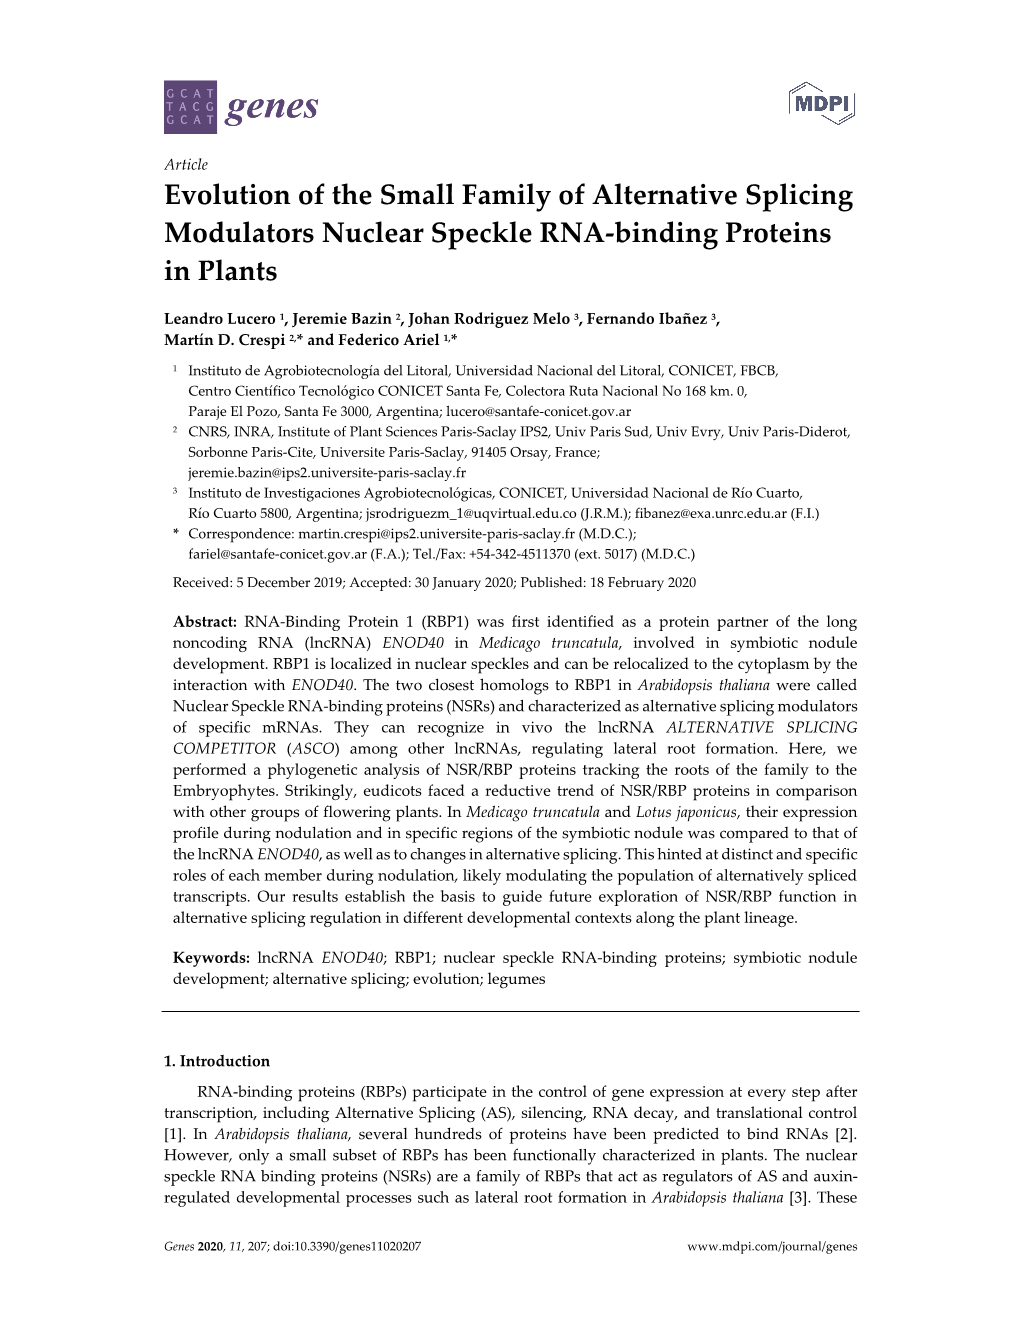 Evolution of the Small Family of Alternative Splicing Modulators Nuclear Speckle RNA-Binding Proteins in Plants